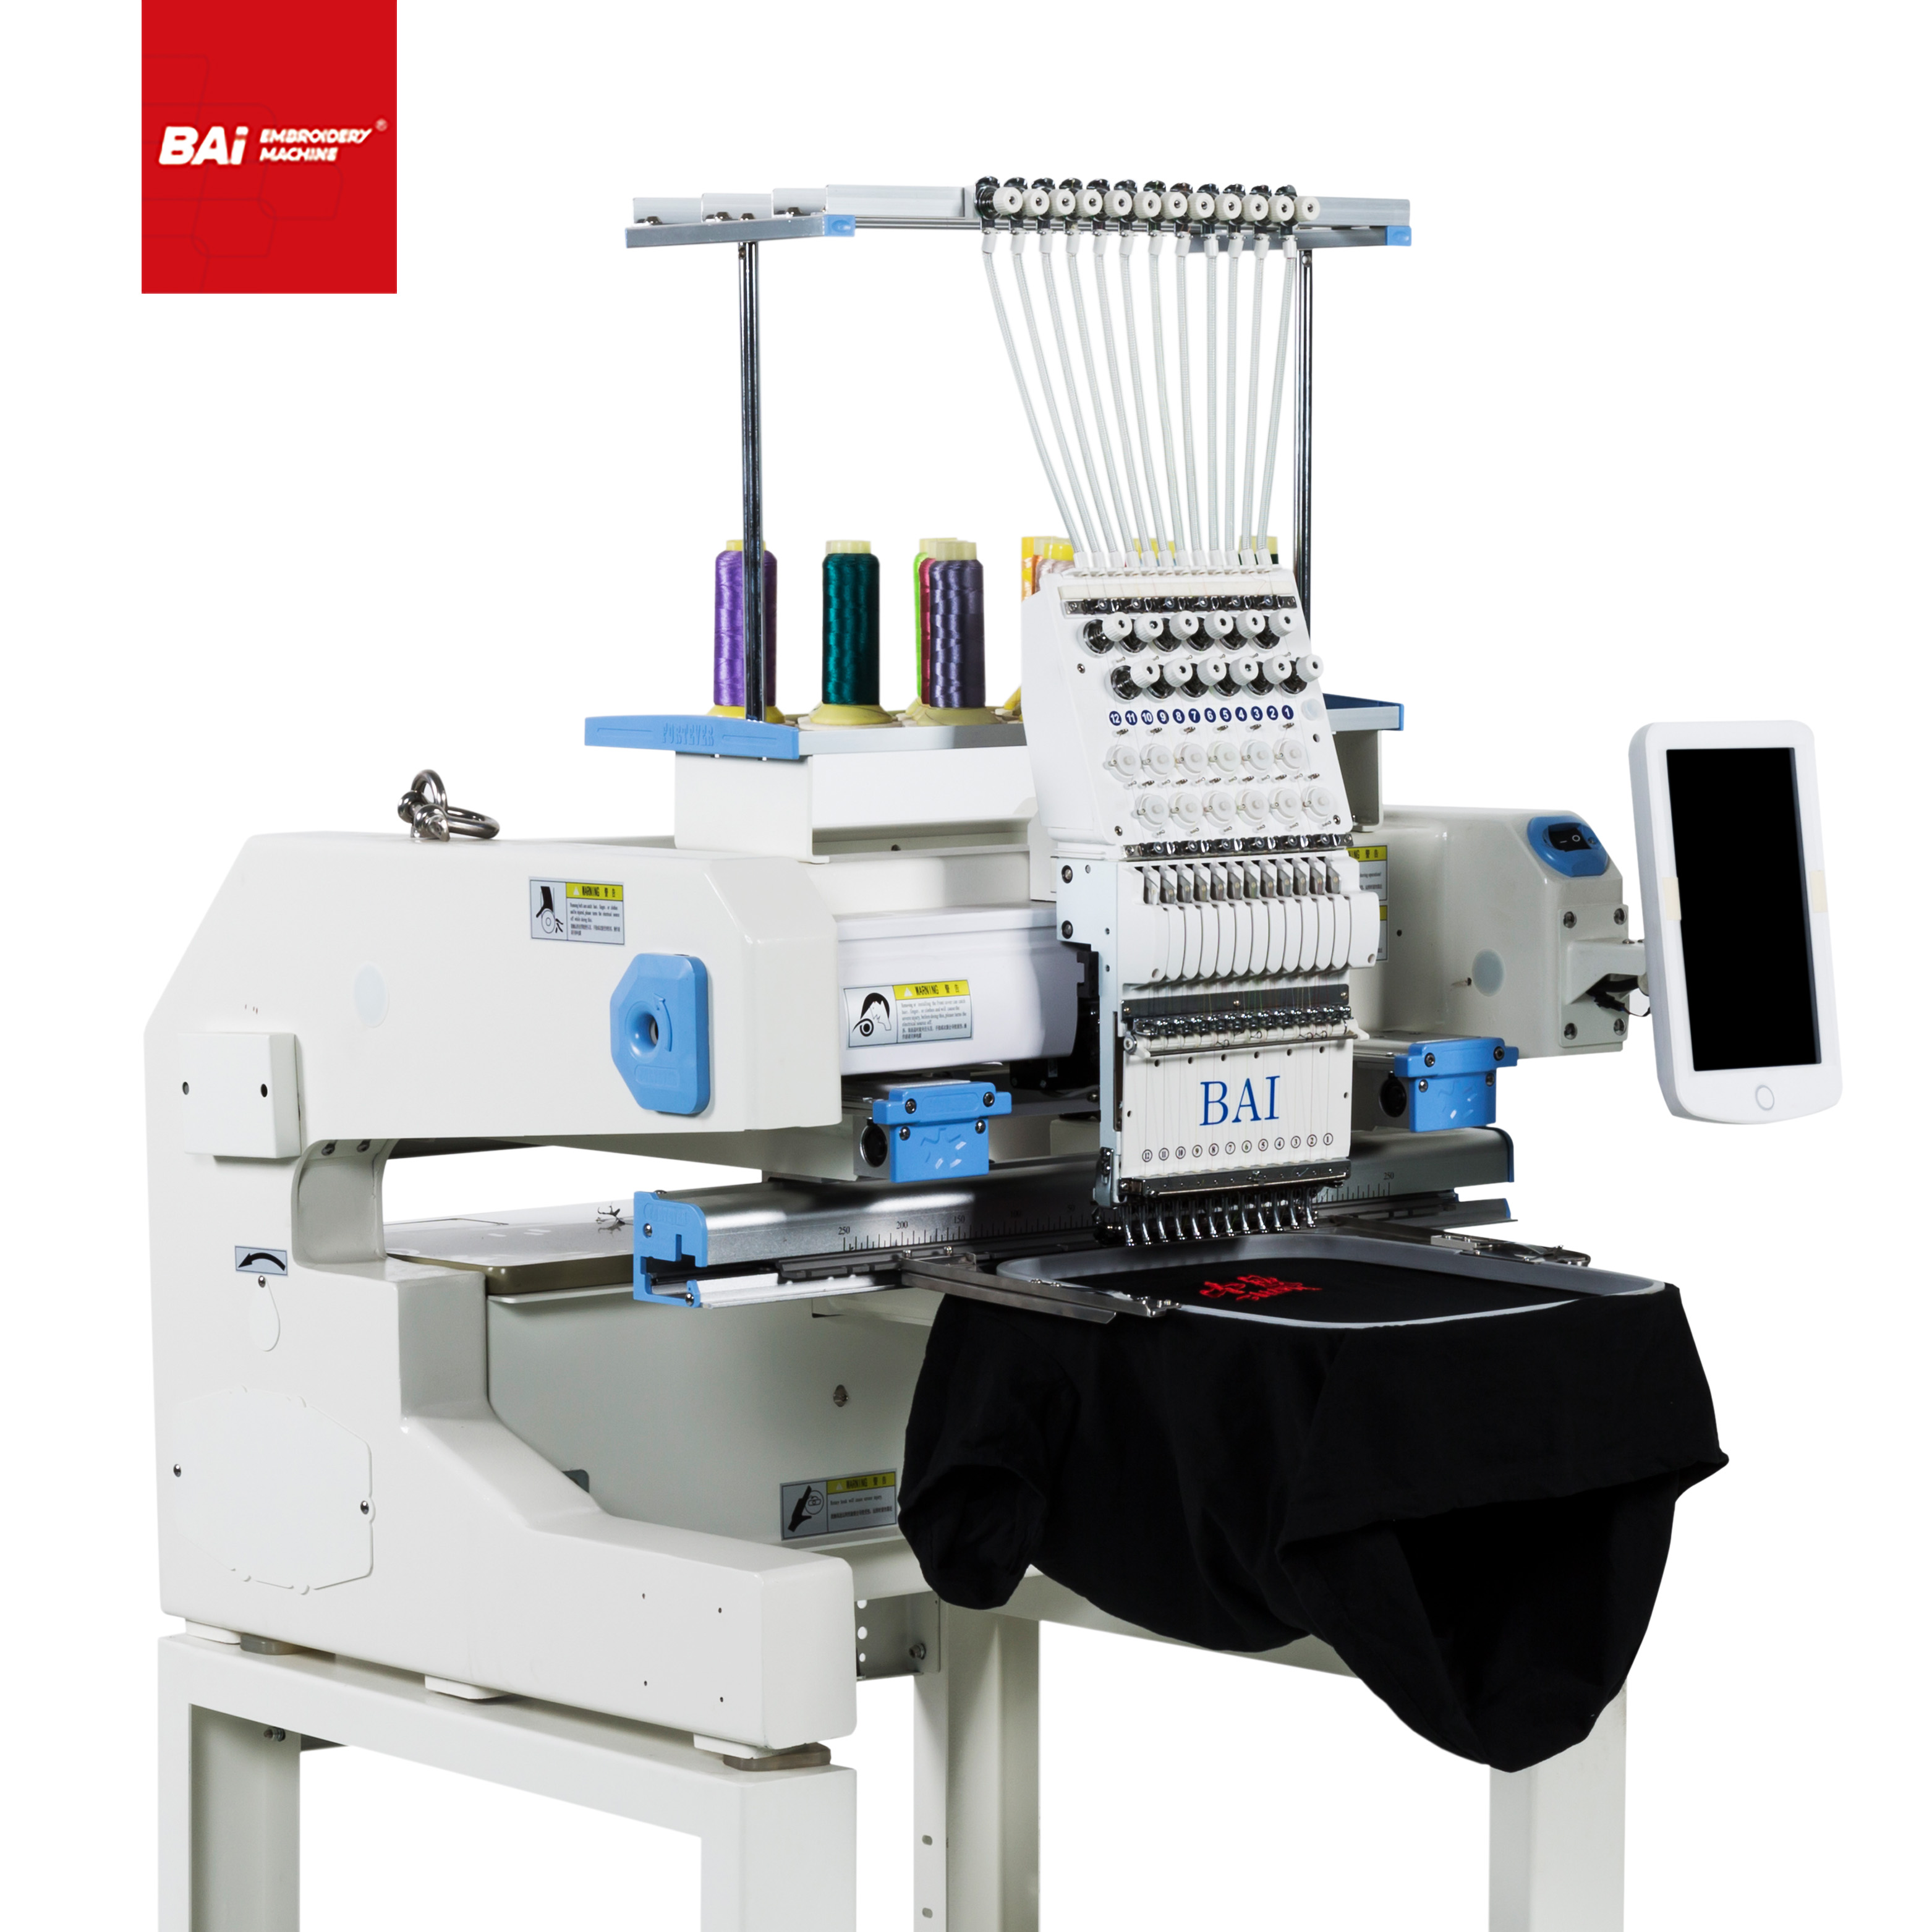 BAI Cap Flat Finished Garment Embroidery Machine for Commercial